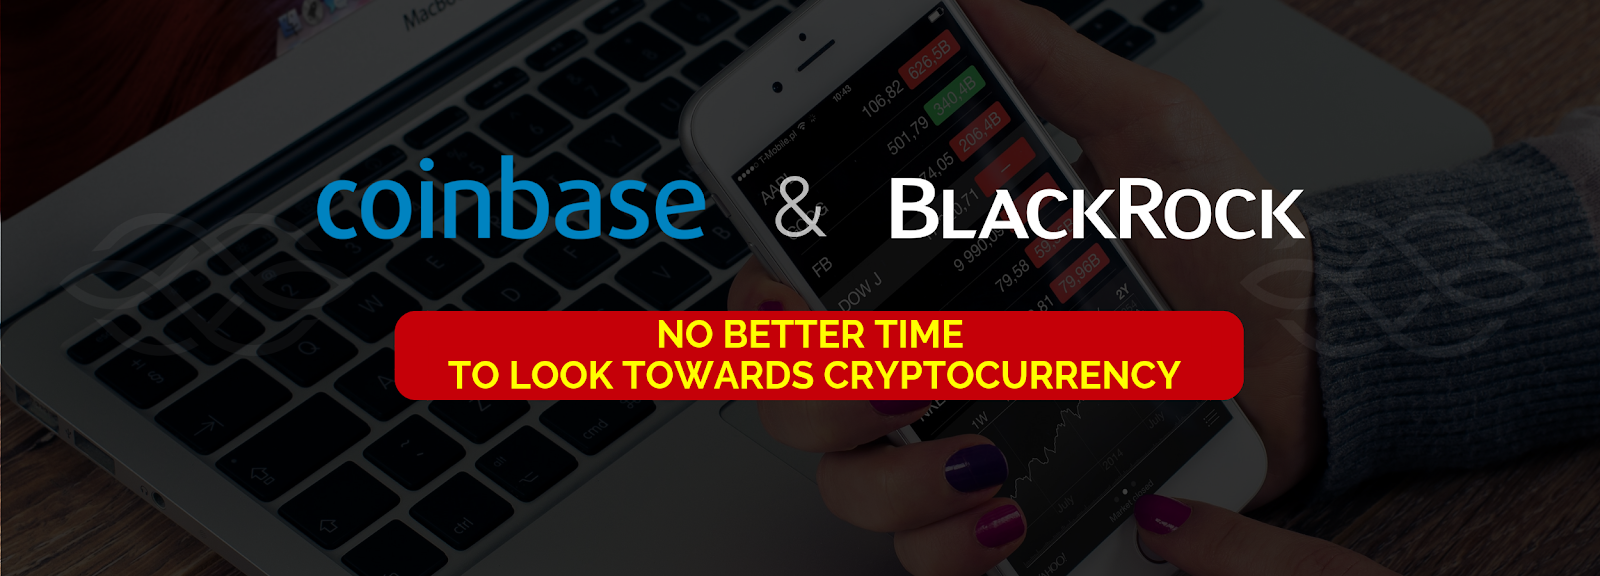 Coinbase is Seeking a Collaboration with BlackRock